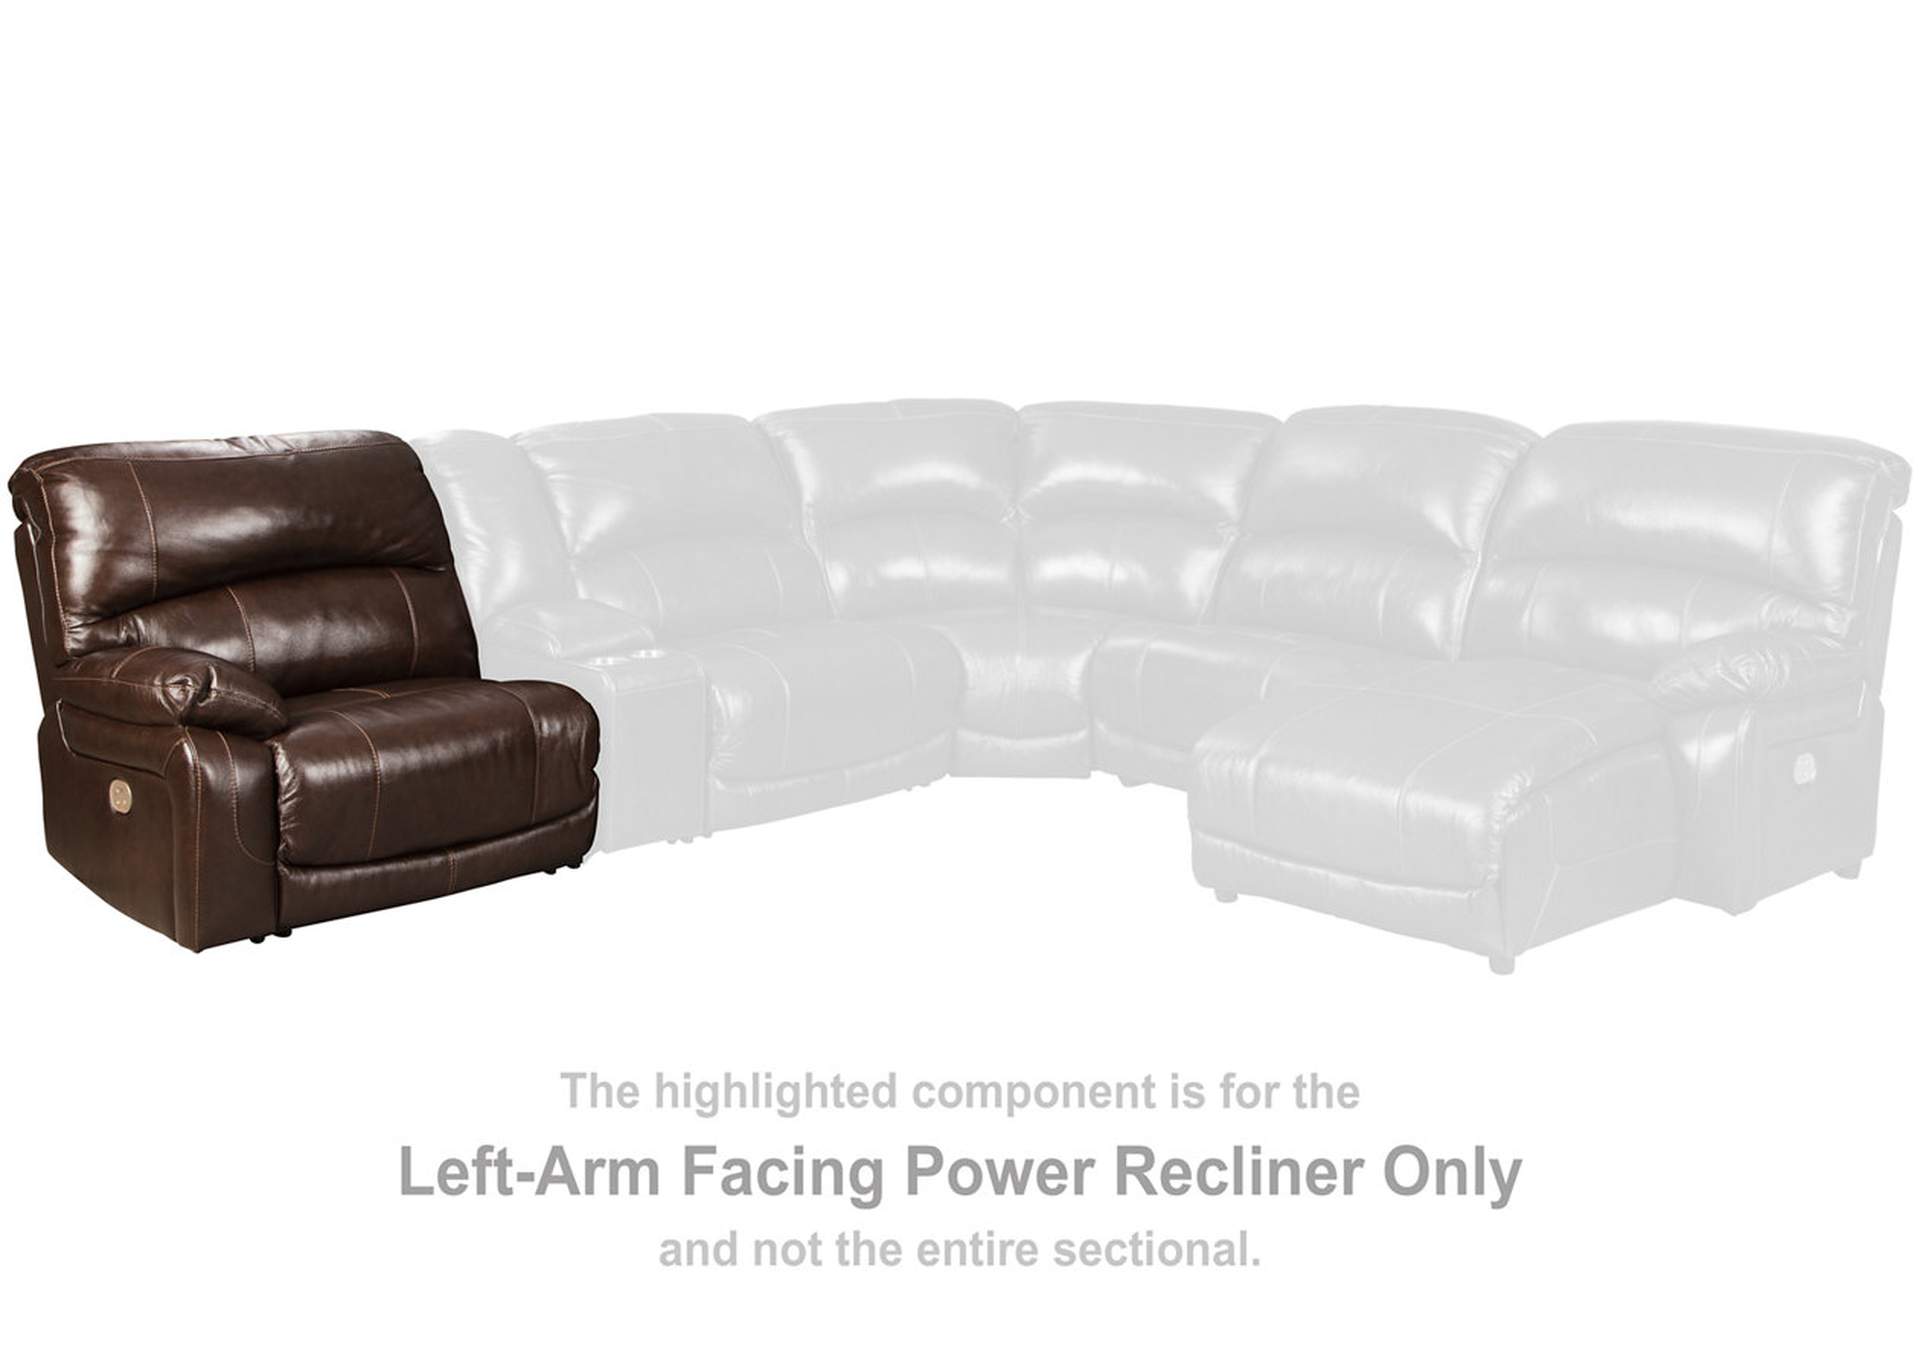 Hallstrung 5-Piece Power Reclining Sectional with Chaise,Signature Design By Ashley